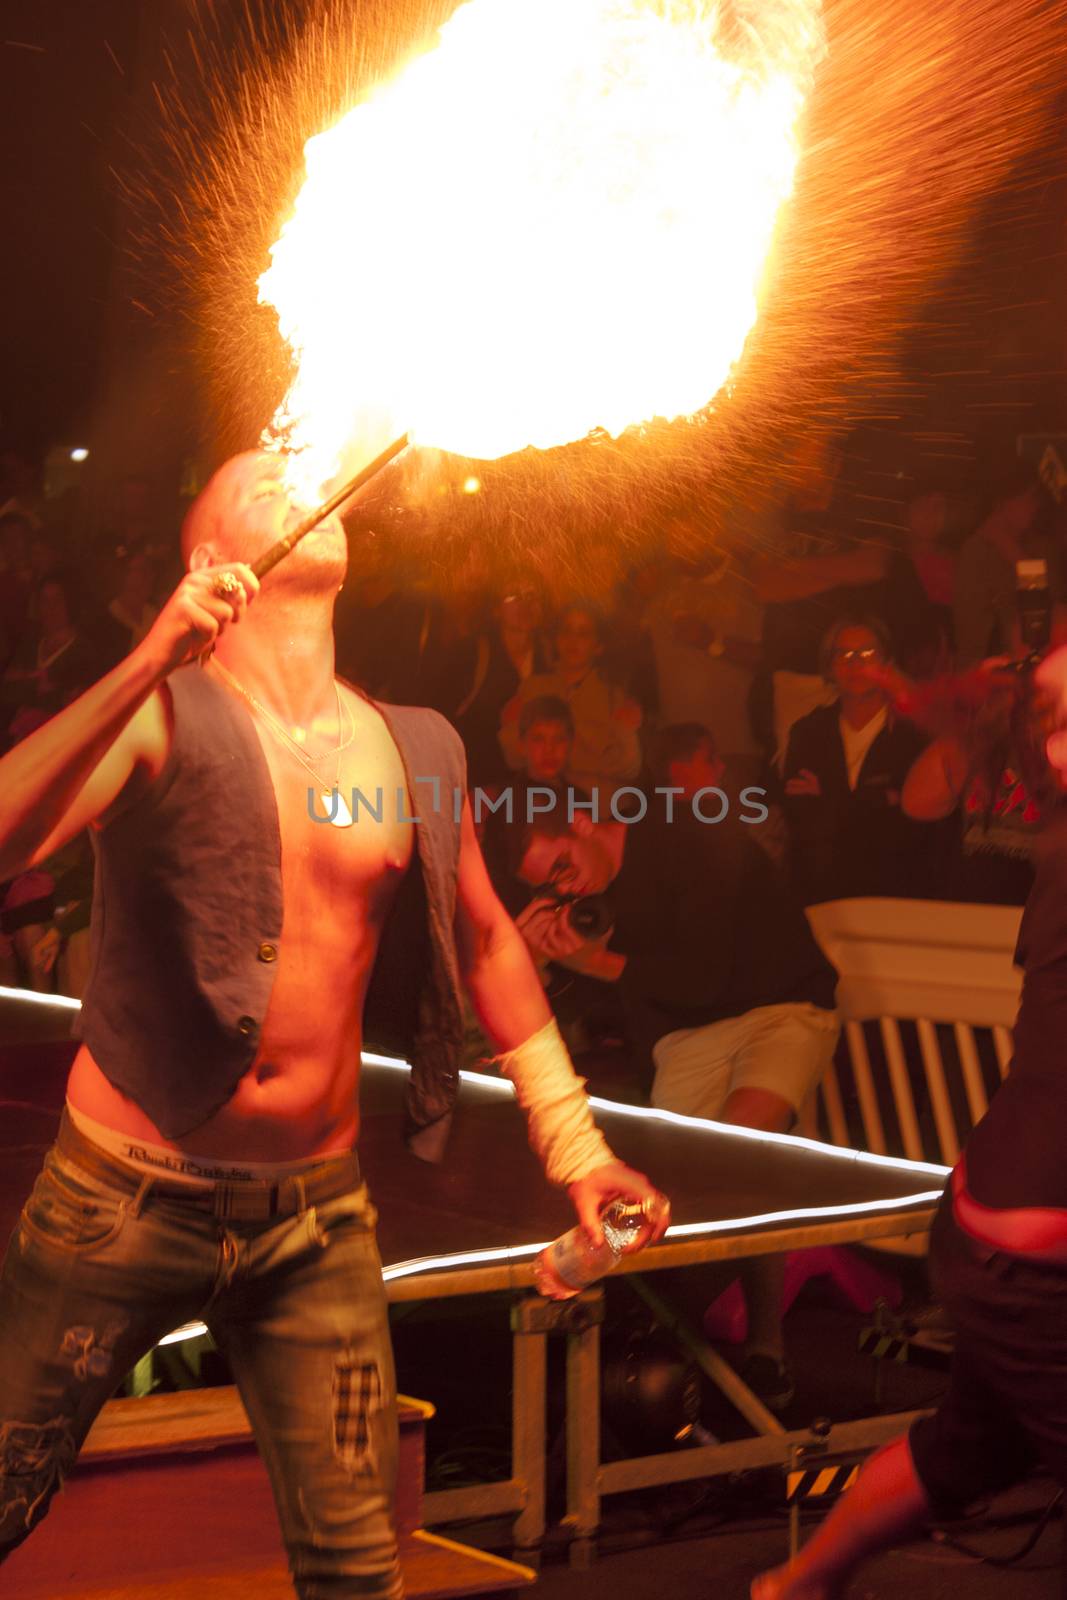 LOREO, ITALY 24 MARCH 2020: Fire eaters They perform a show to the public